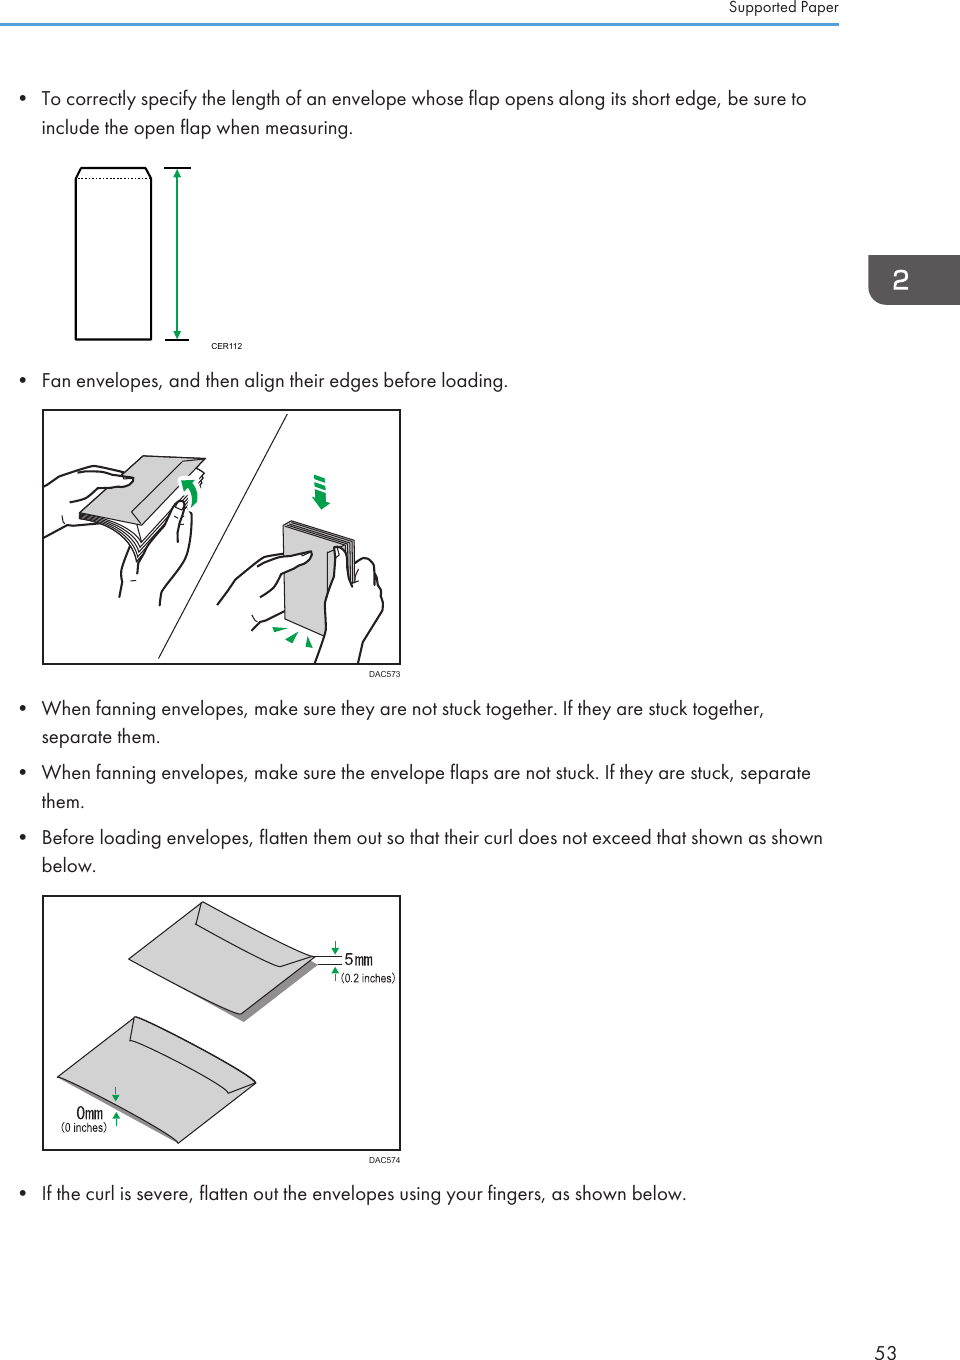 • To correctly specify the length of an envelope whose flap opens along its short edge, be sure toinclude the open flap when measuring.CER112• Fan envelopes, and then align their edges before loading.DAC573• When fanning envelopes, make sure they are not stuck together. If they are stuck together,separate them.• When fanning envelopes, make sure the envelope flaps are not stuck. If they are stuck, separatethem.• Before loading envelopes, flatten them out so that their curl does not exceed that shown as shownbelow.DAC574• If the curl is severe, flatten out the envelopes using your fingers, as shown below.Supported Paper53